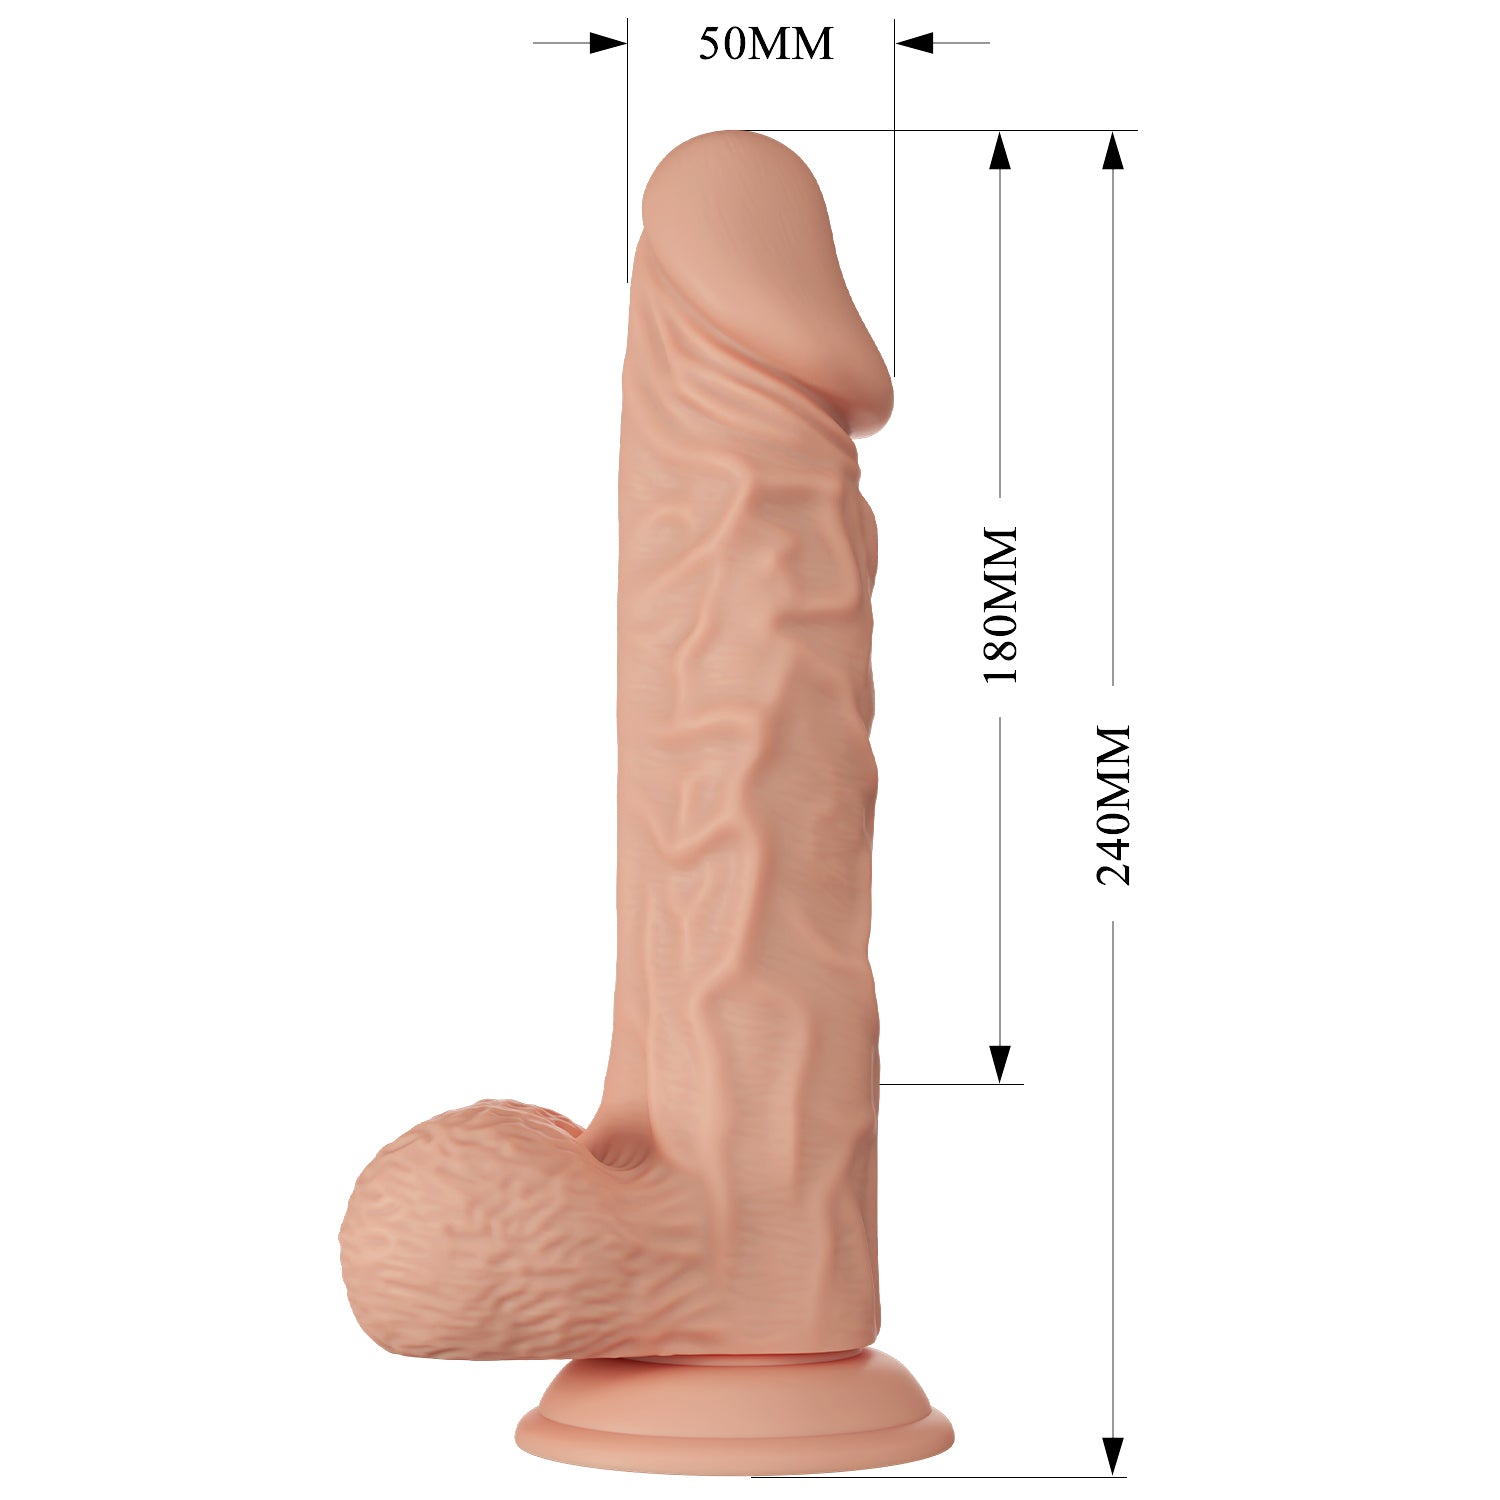 Baile 9.4 Inch Lifelike Vibrating Dildo with Suction Cup in Flesh